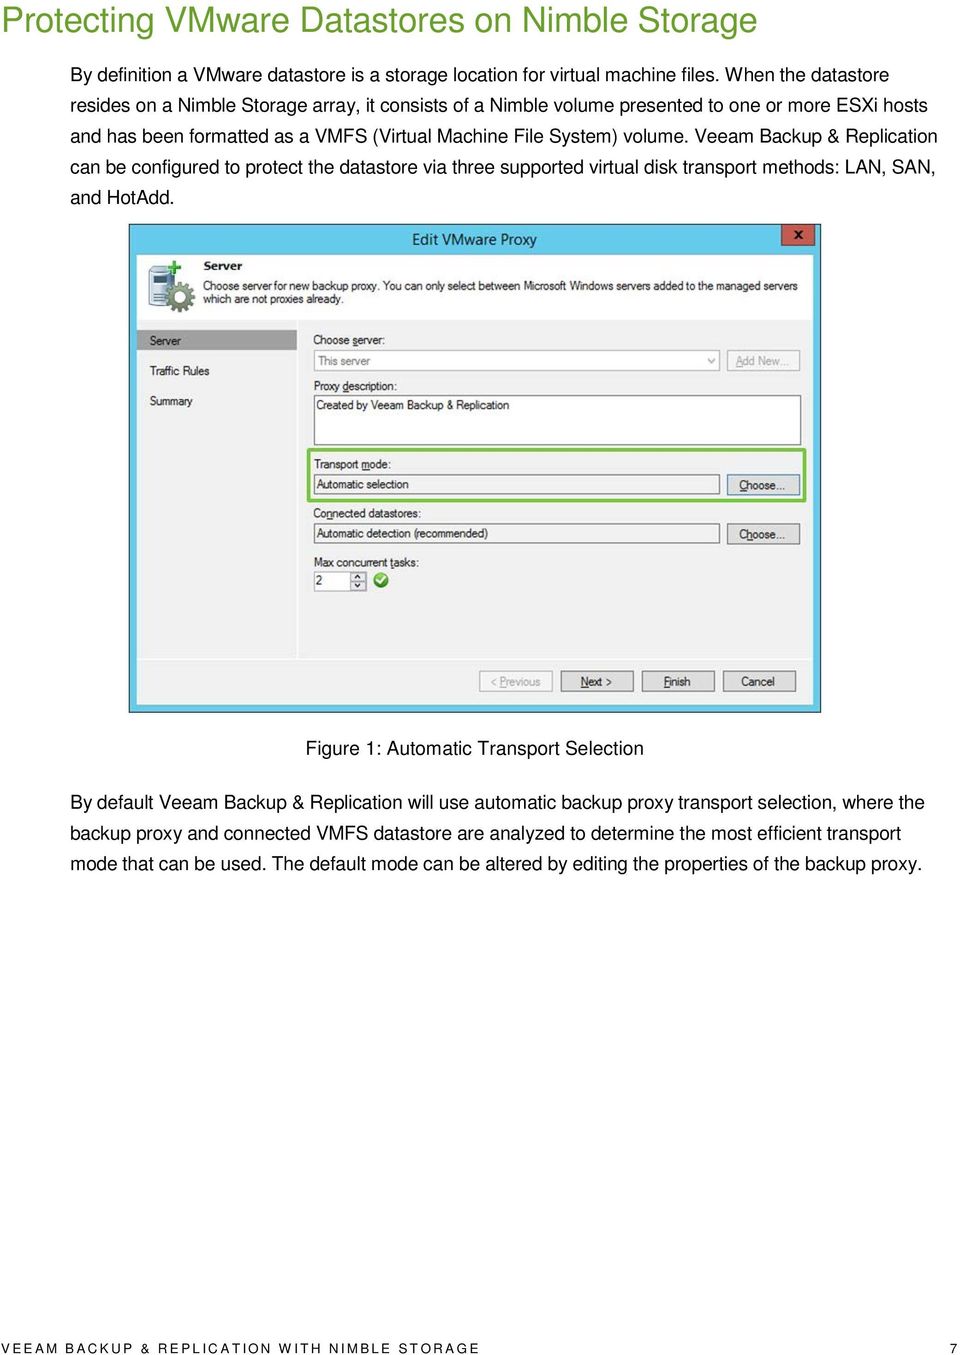 Veeam Backup & Replication can be configured to protect the datastore via three supported virtual disk transport methods: LAN, SAN, and HotAdd.